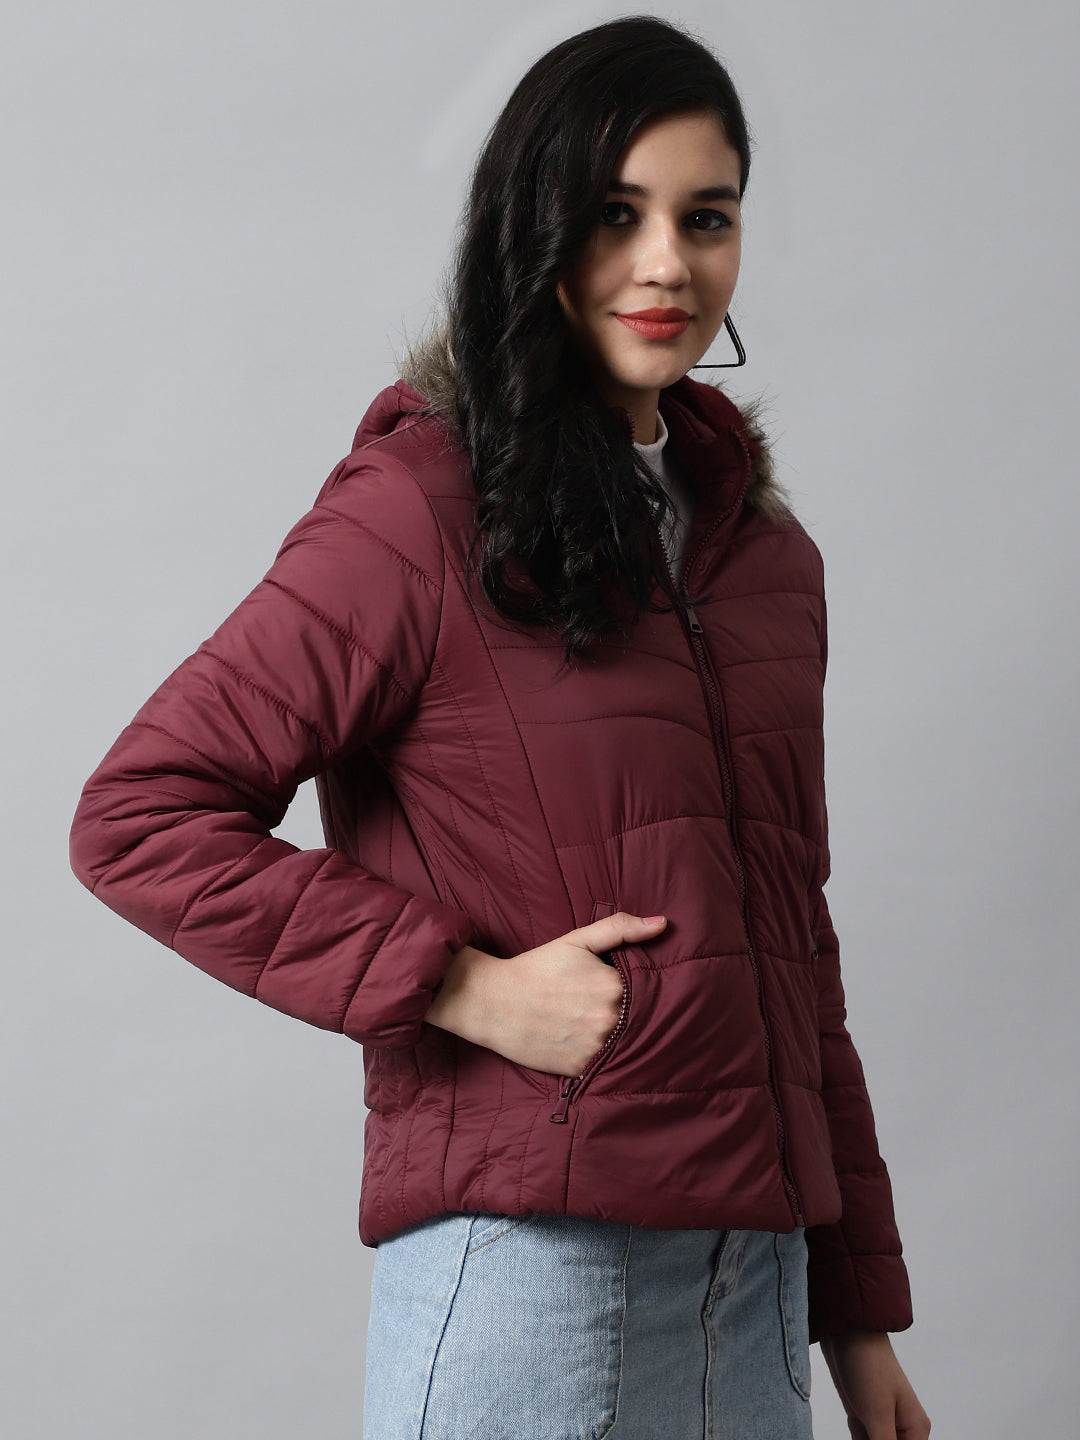 Shop winter leather jackets womens at Discount Prices - WearOstrich.com